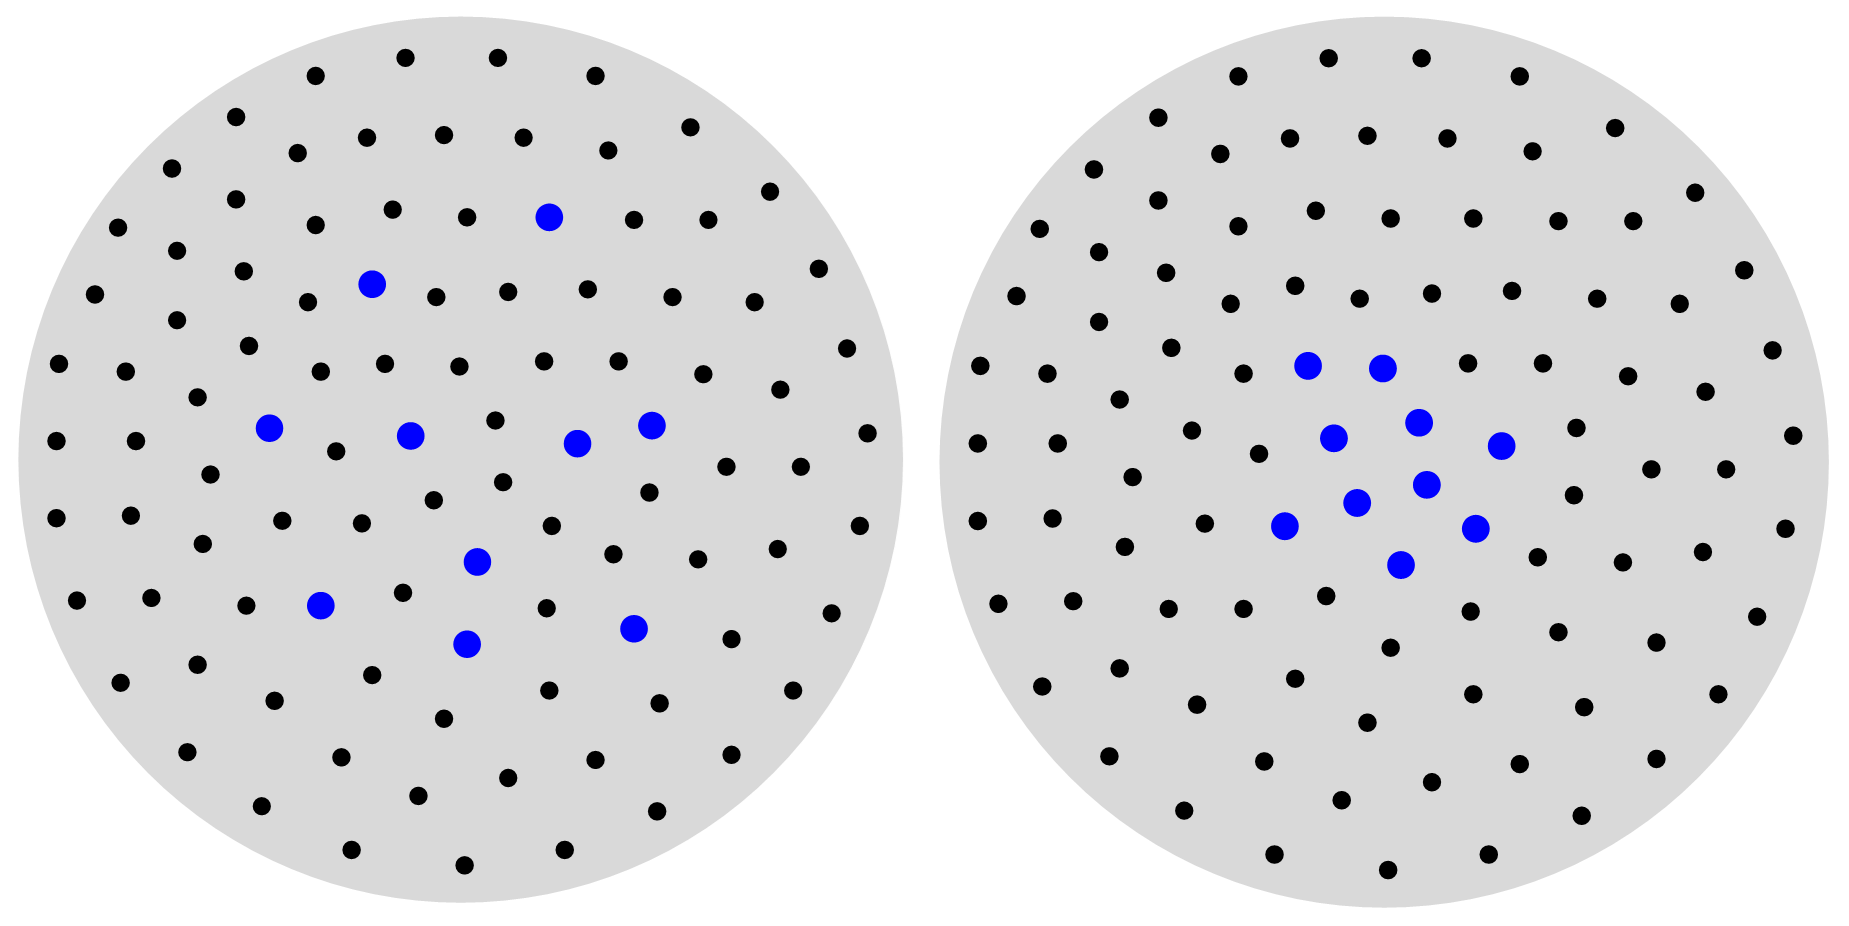 Left: partitions where the set of blue points occupy one region and the set of black points another region, similar to how  many systems work. Right: the partitions that occur in nuclei, where the partitions of blue and black points occupy the same regions.